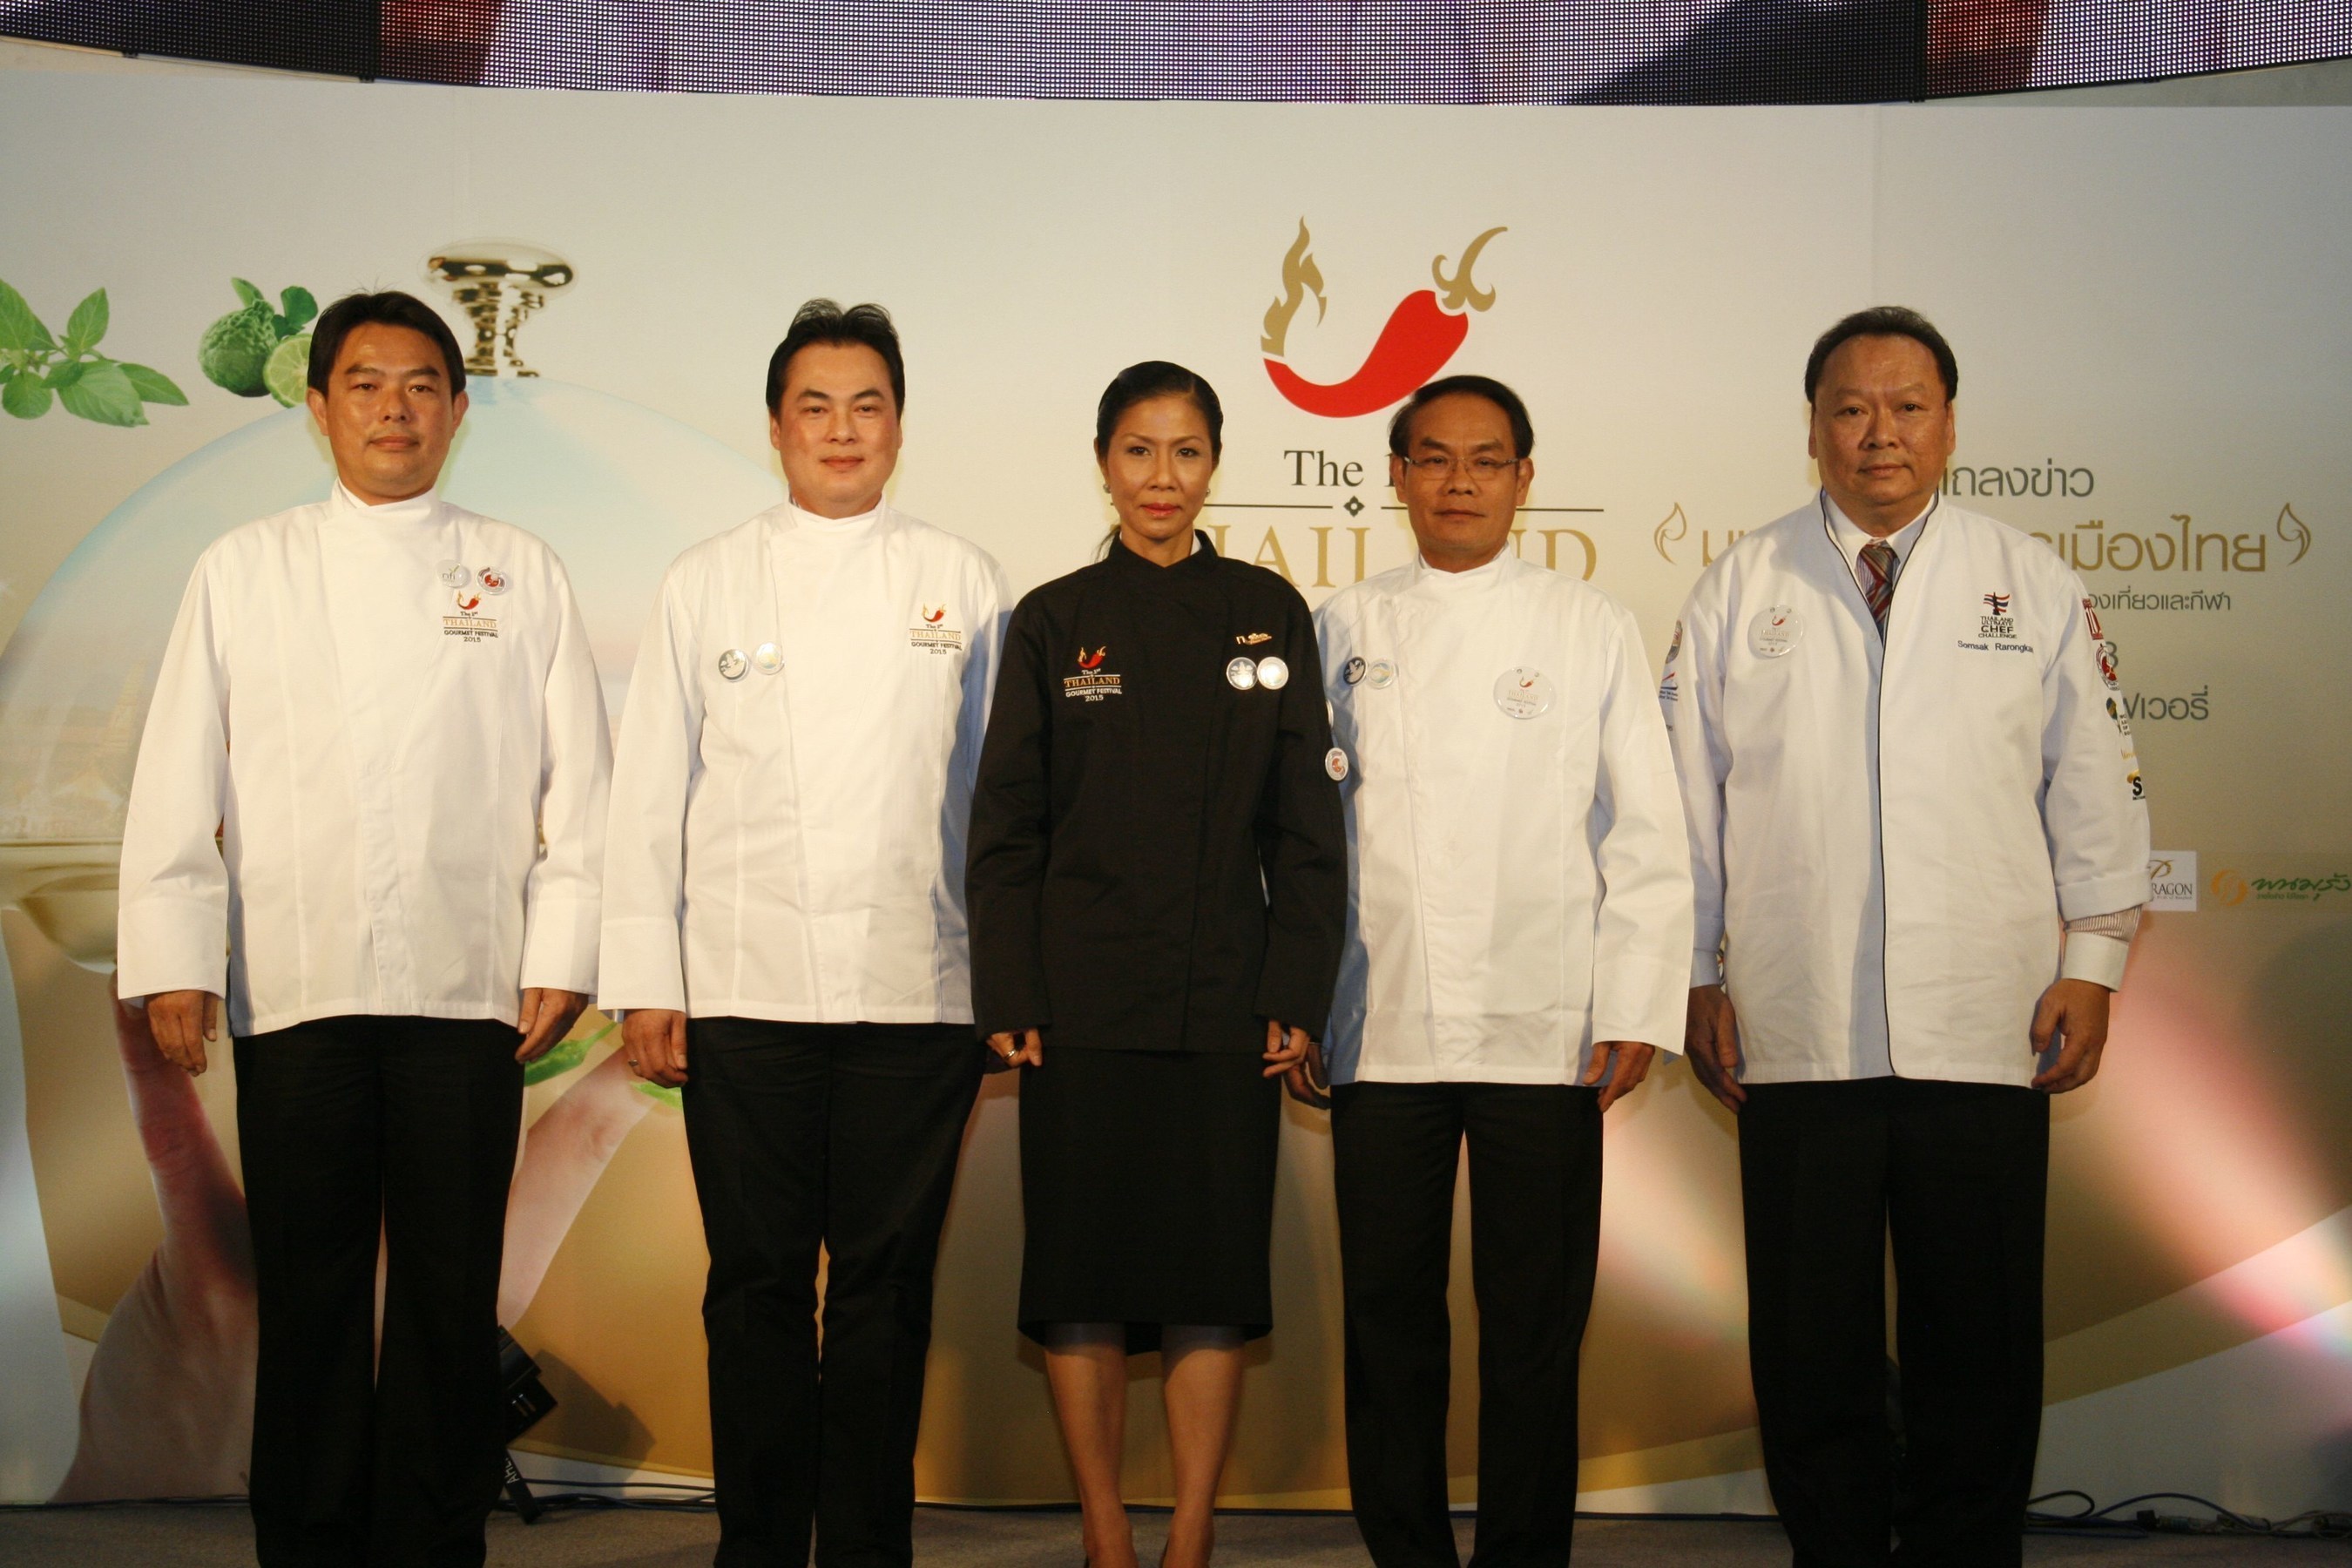 Mrs.Kobkarn Wattanavrangkul, Minister of Tourism and Sport Chairman of the conference, organized "the 1st Thailand Gourmet Festival 2015" held on January 23 - 25, 2015 At Parc Paragon Hall, Siam Paragon with Dr.Suwat Sidthilaw, Permanent Secretary of Ministry of Tourism and Sports, Acting2, LT.Anupap Geasornsuwan, Director-General of Ministry of Tourism and Sports, Mr.Pecth Chinabutr, NFI President and Mr.Somsak Rarongcome, Thailand Chefs Association.